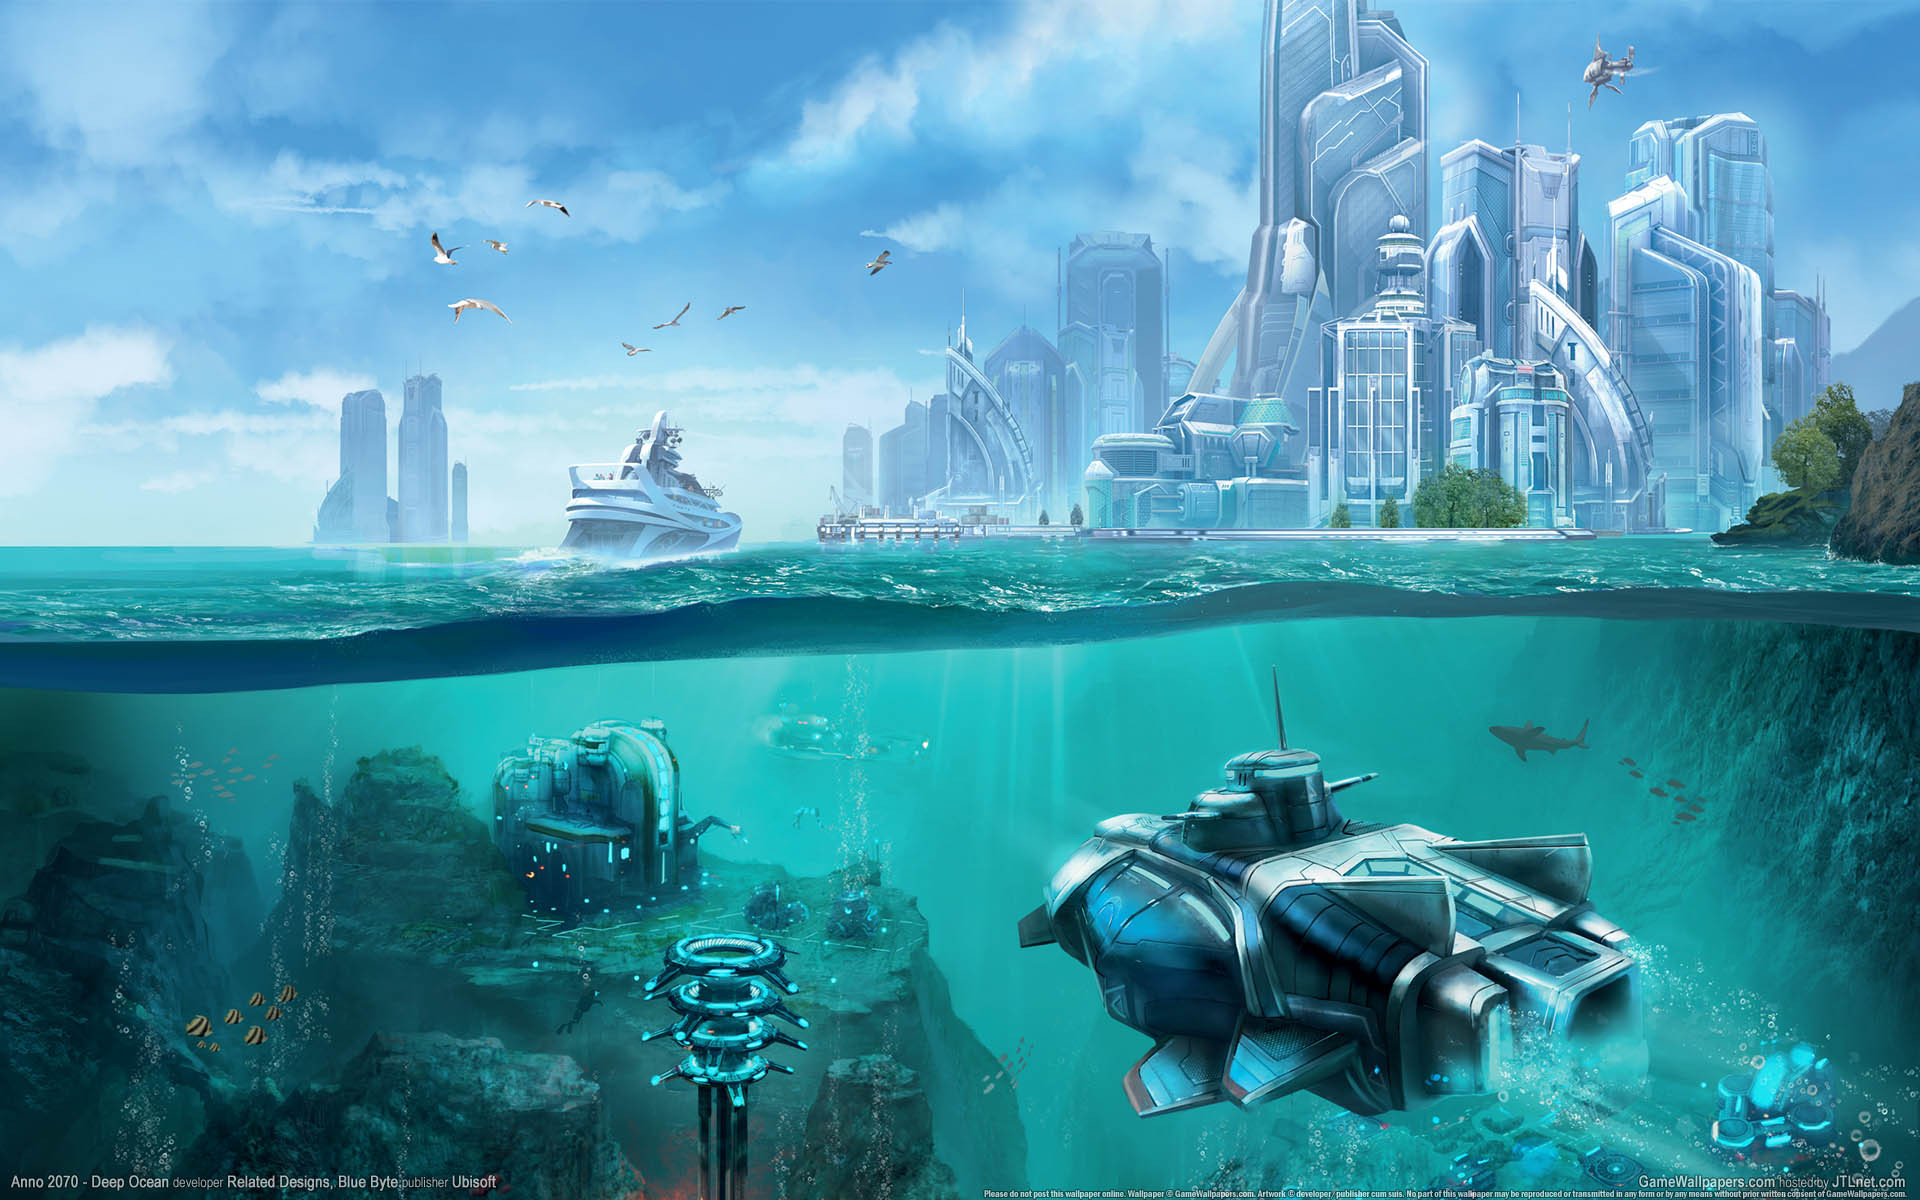 Download Wallpaper The Sky, The City, Future, The Ocean, Ship.